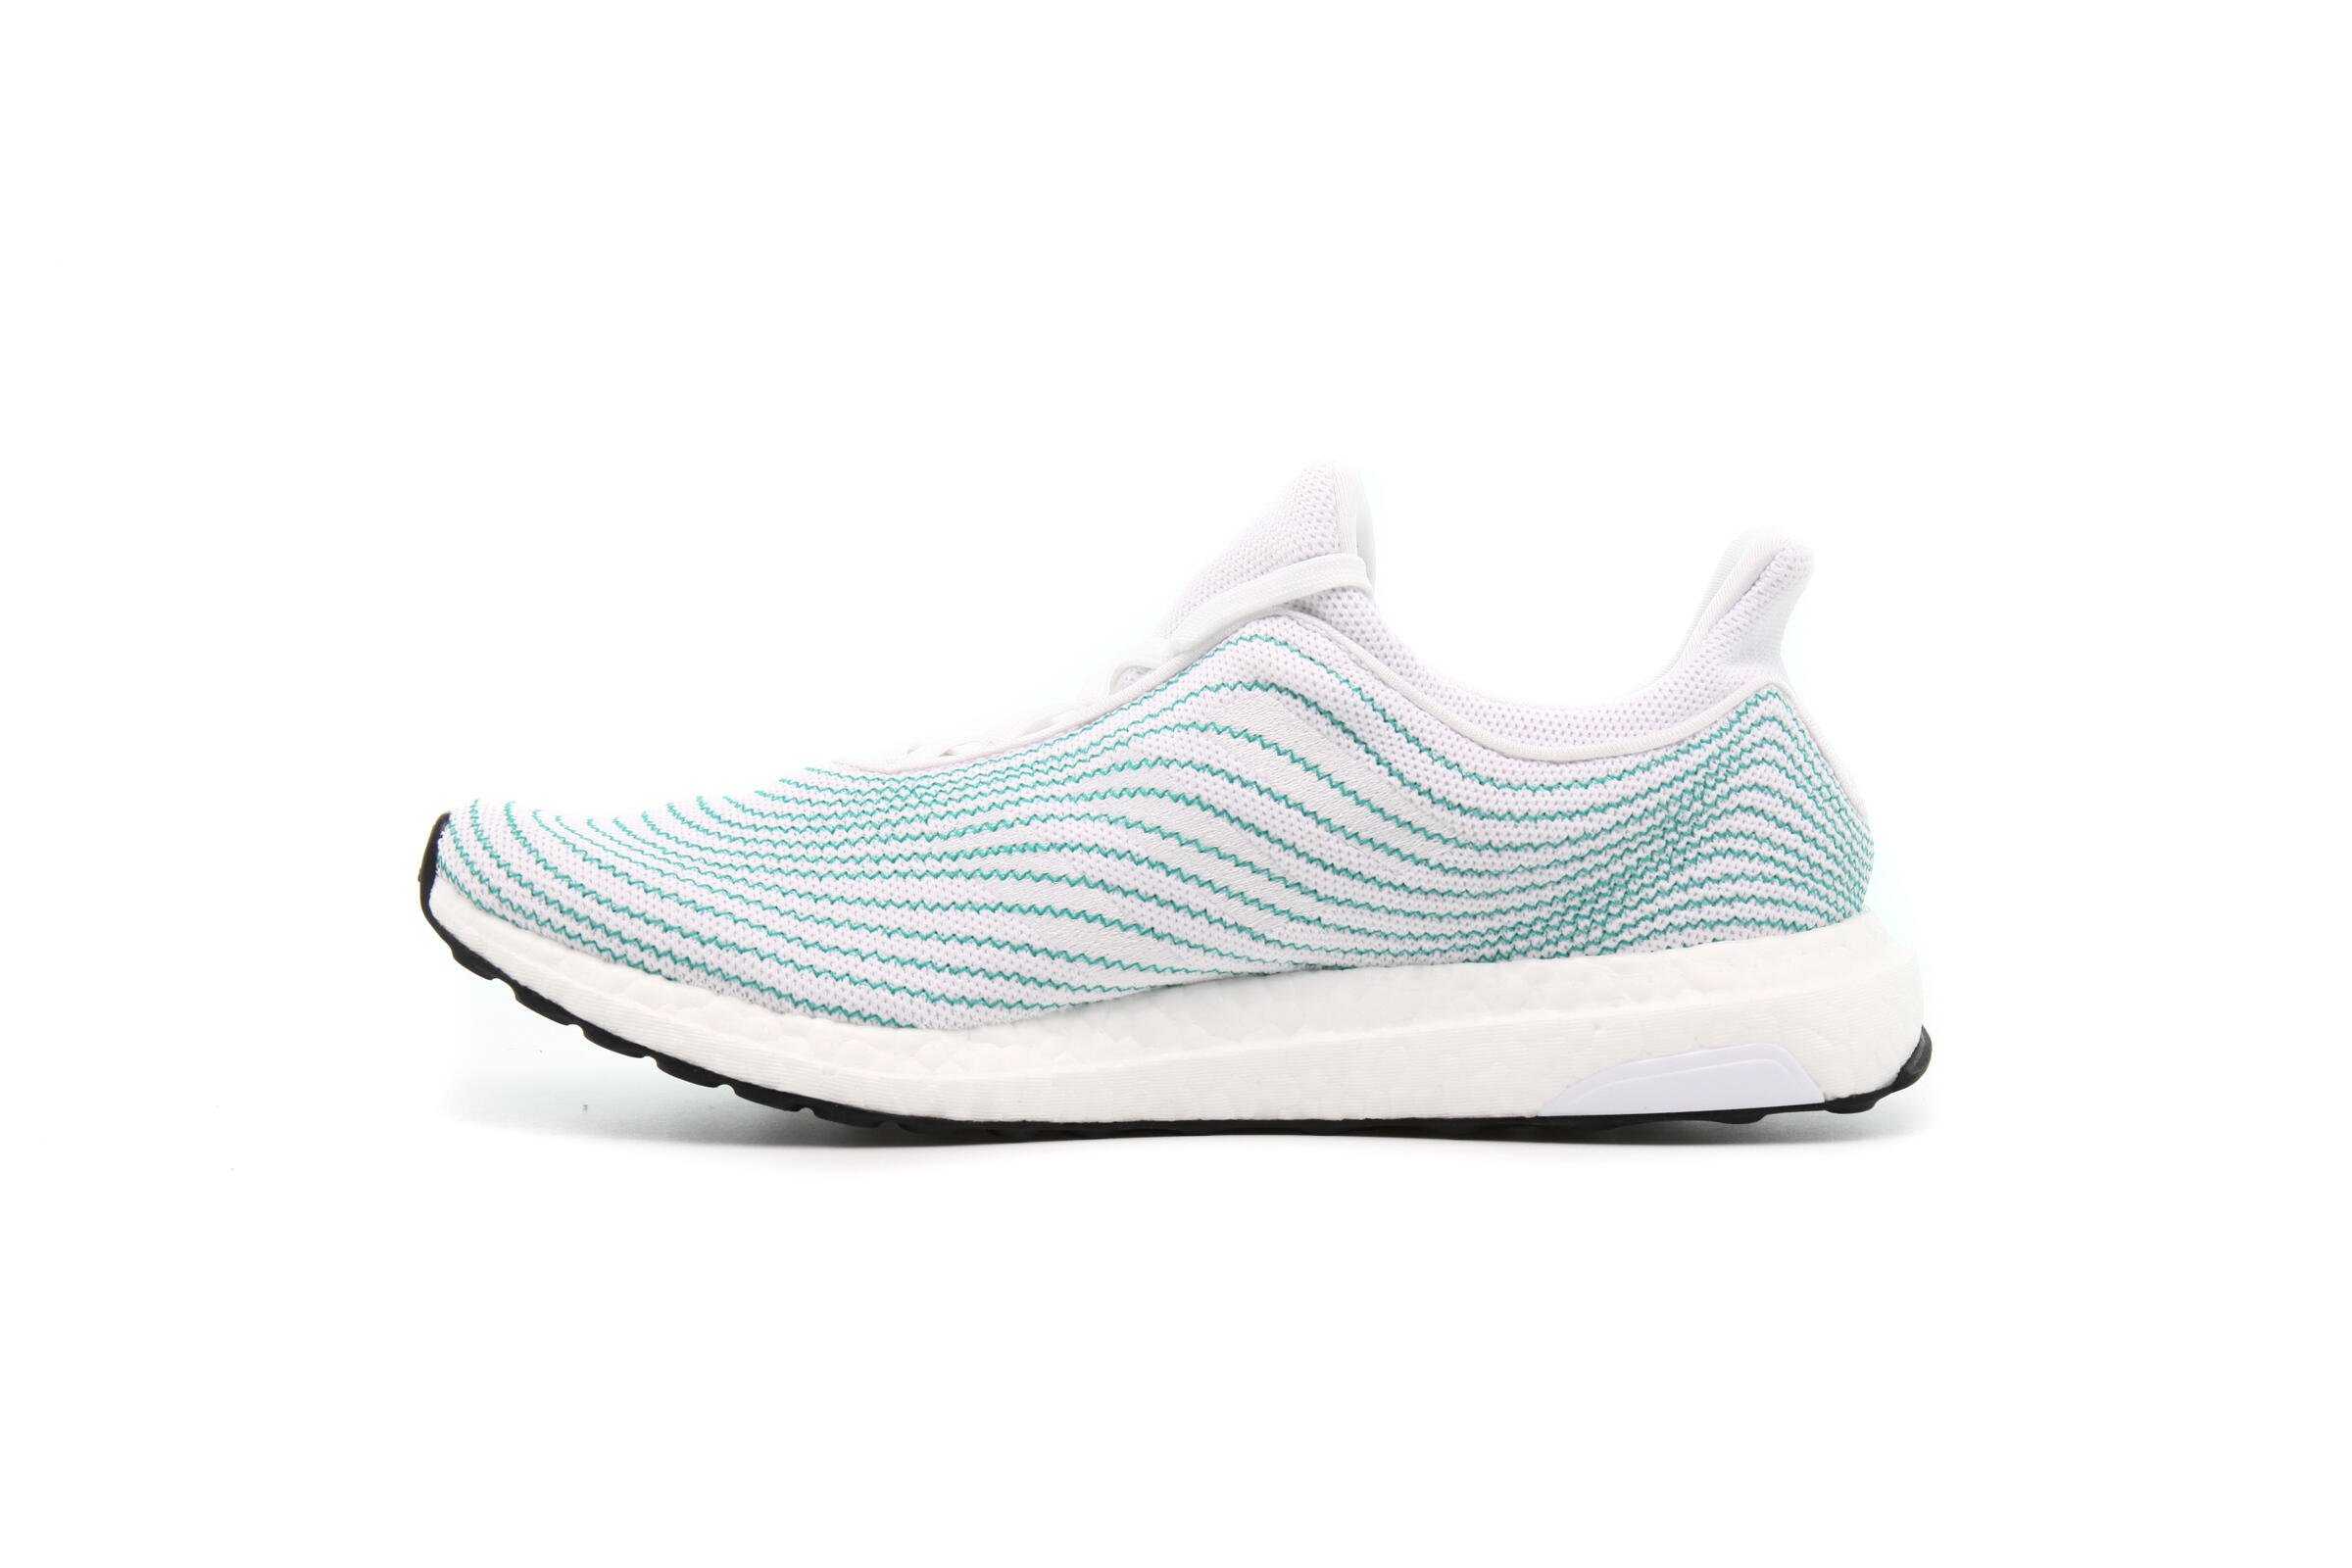 adidas Performance ULTRABOOST PARLEY UNCAGED  "WHITE"